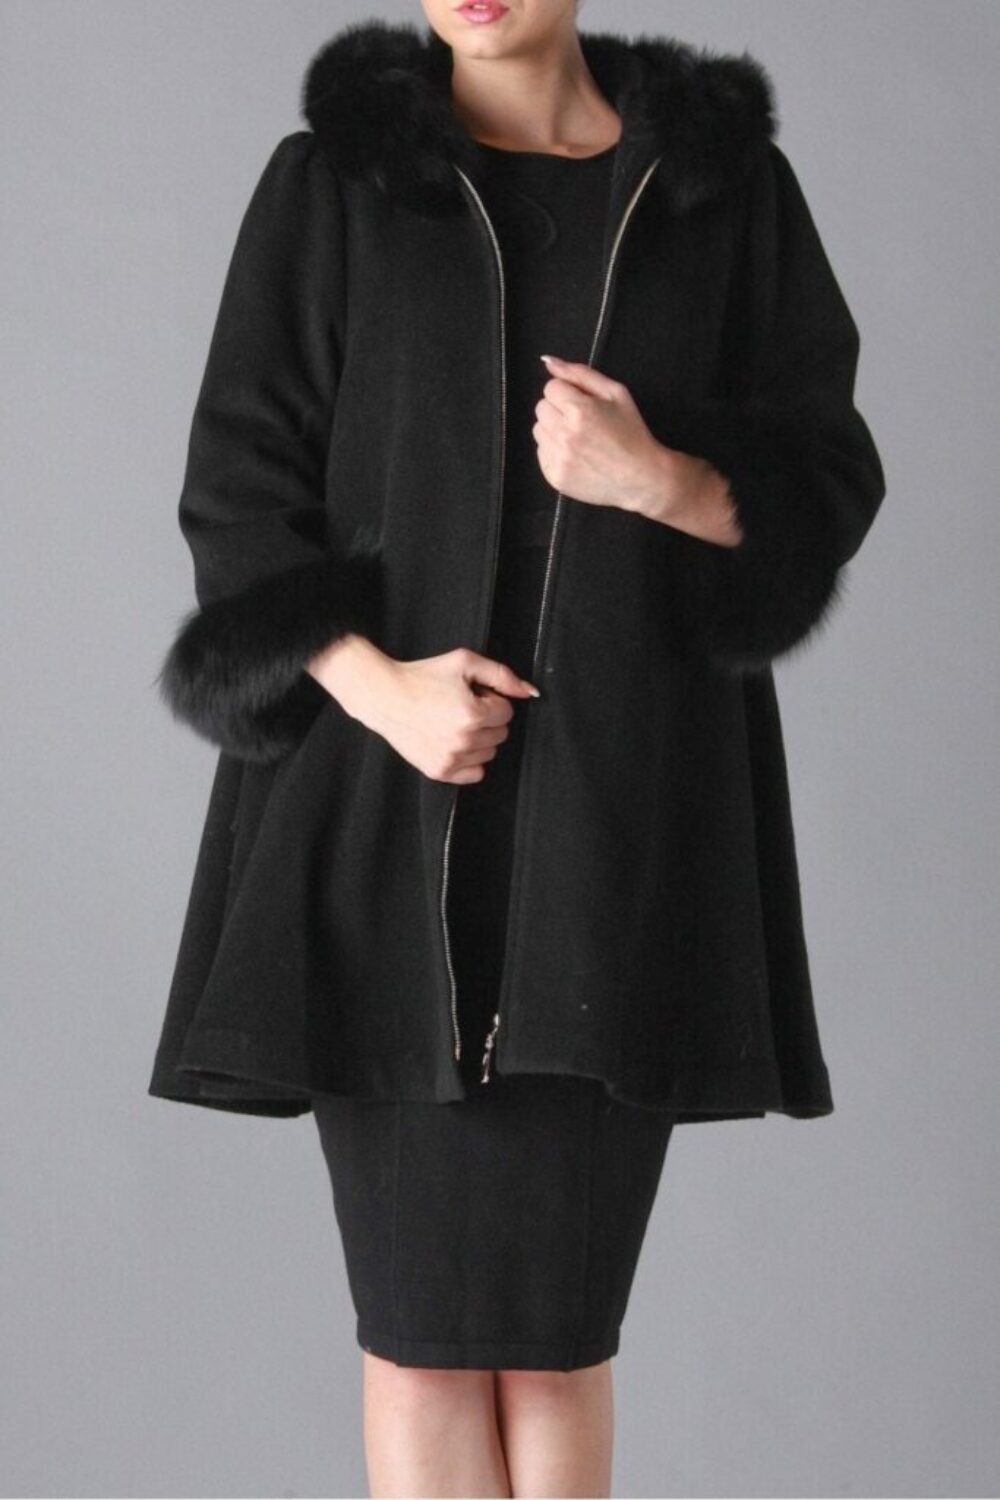 Shop Lux Cashmere Coat and women's luxury and designer clothes at www.lux-apparel.co.uk